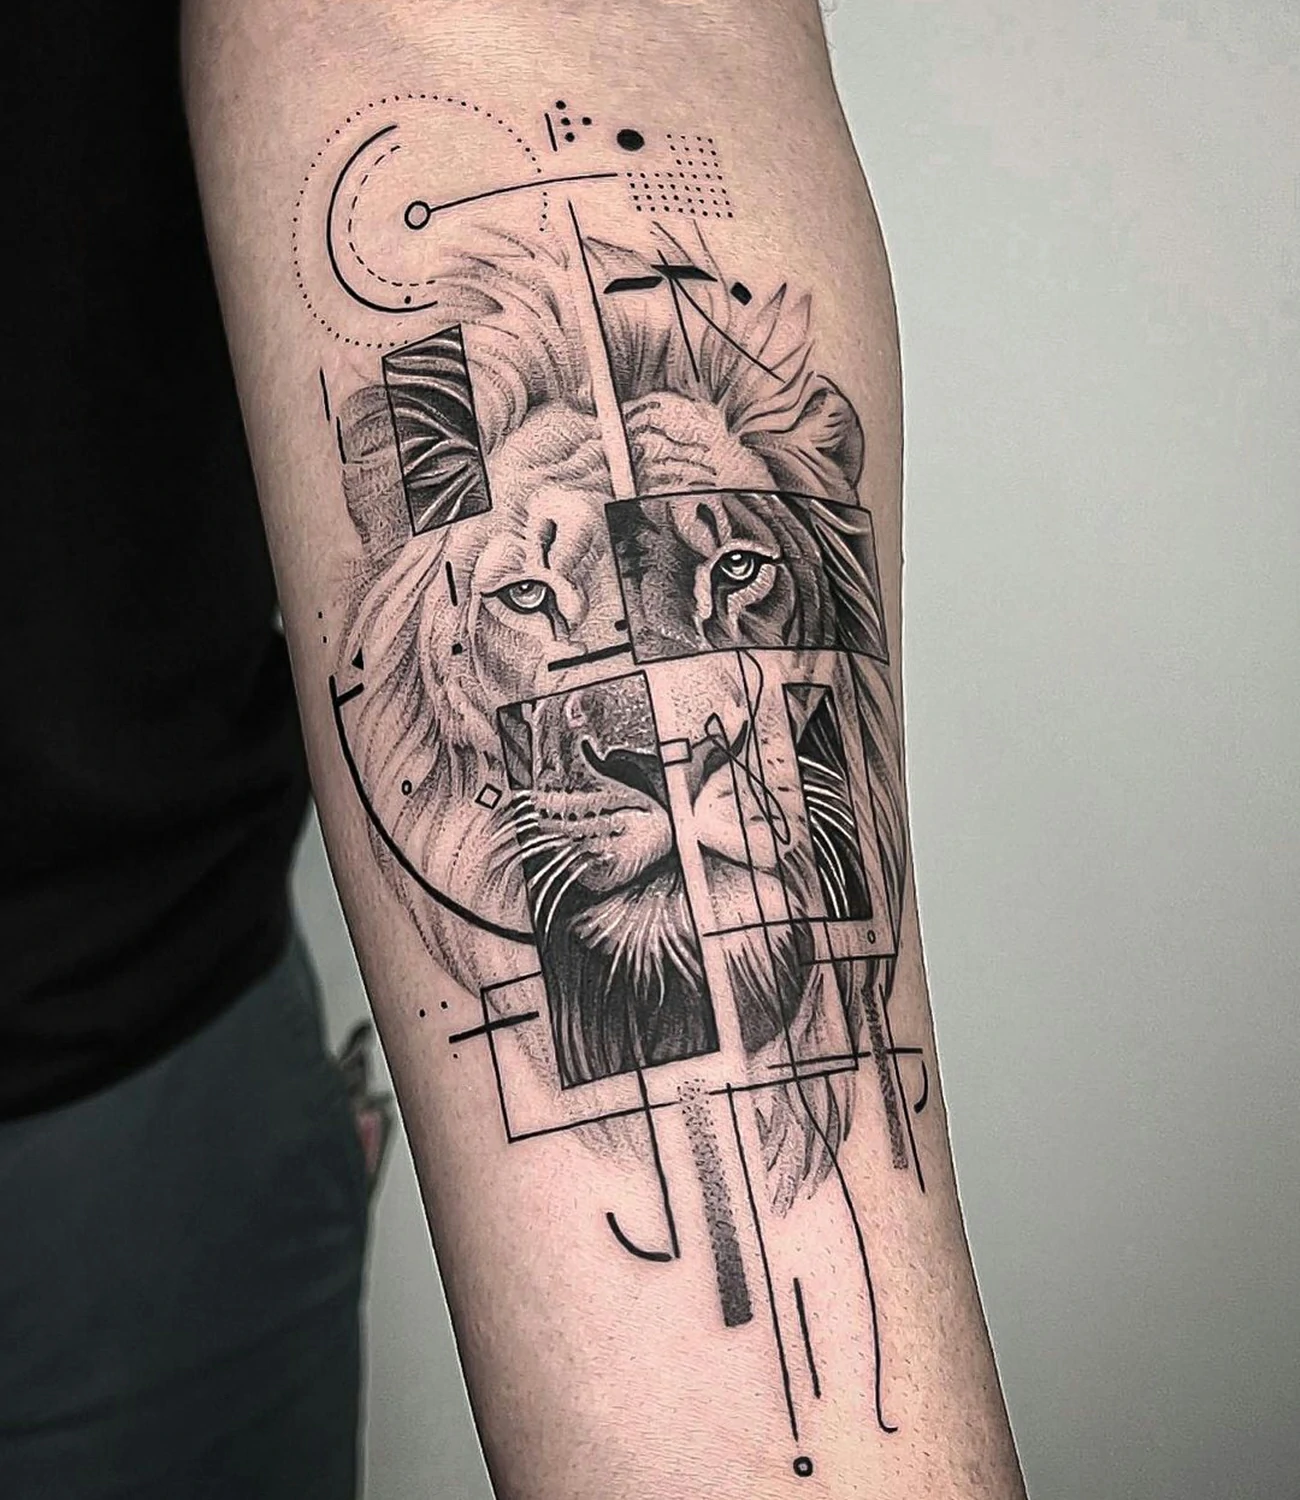 Geometric Lion Tattoo: Geometric lion tattoos combine the regal image of a lion with precise geometric shapes, symbolizing courage and leadership.